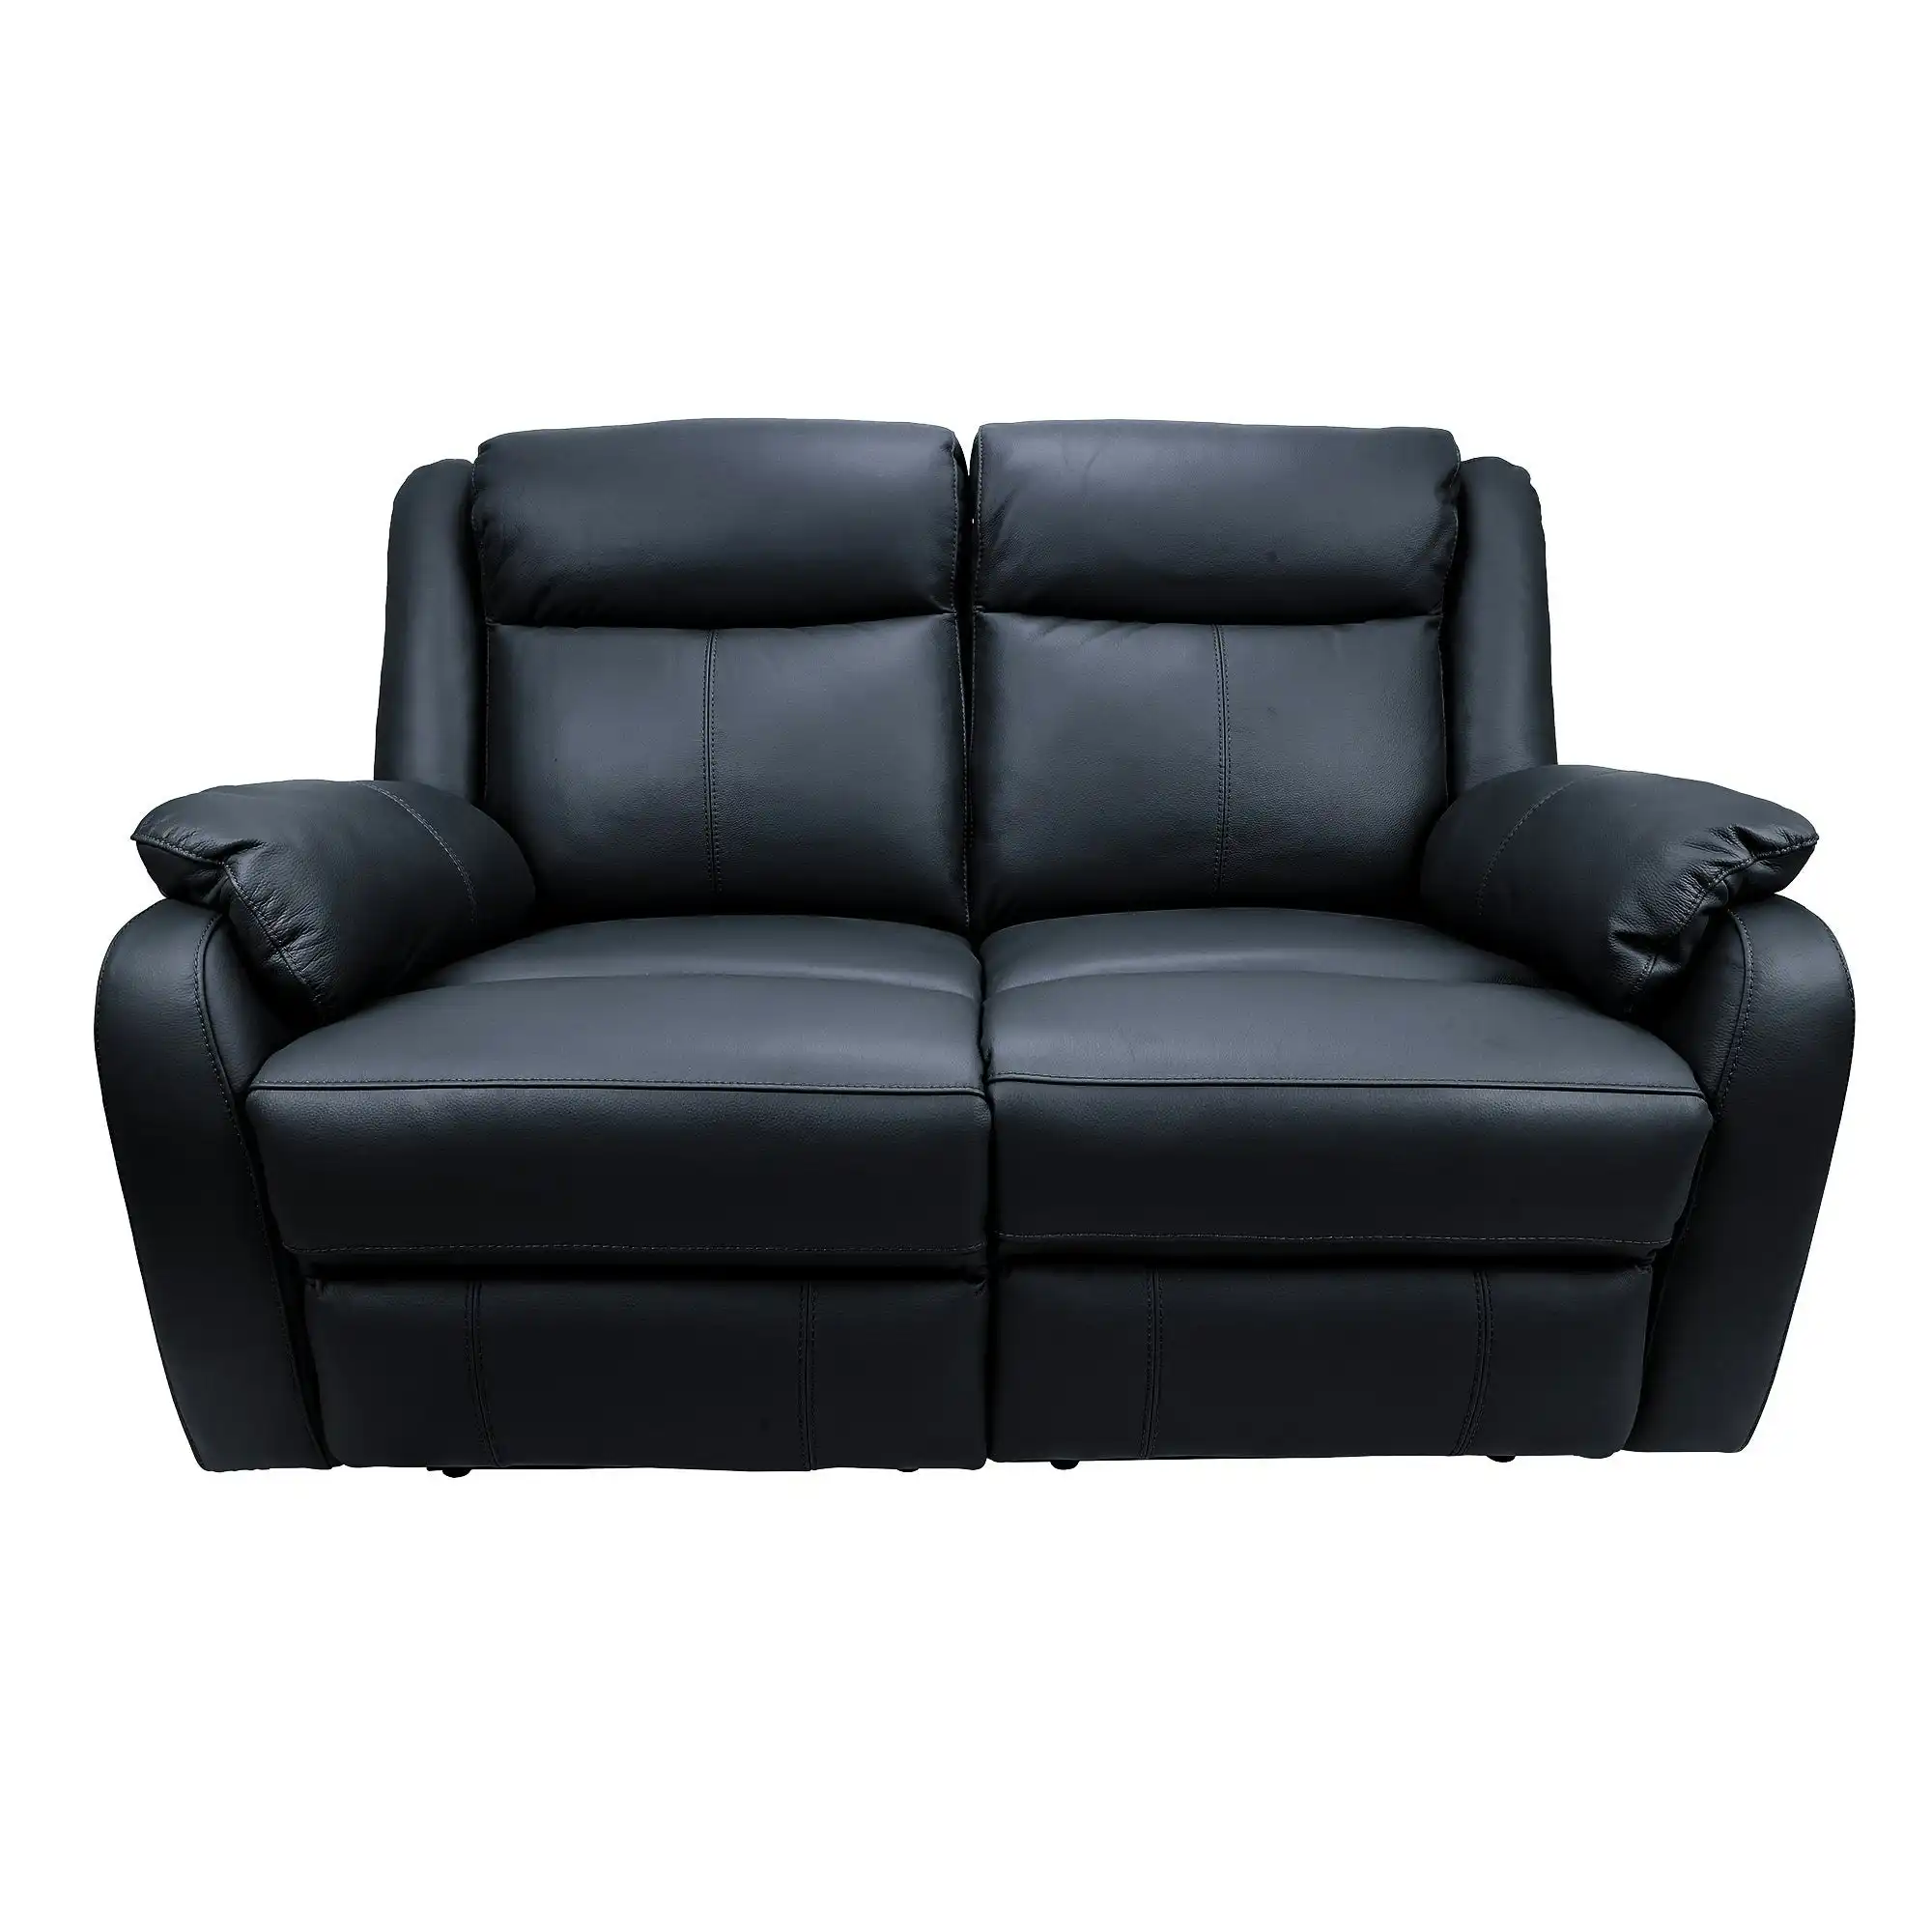 Bella 2 Seater Leather Electric Recliner Sofa Lounge